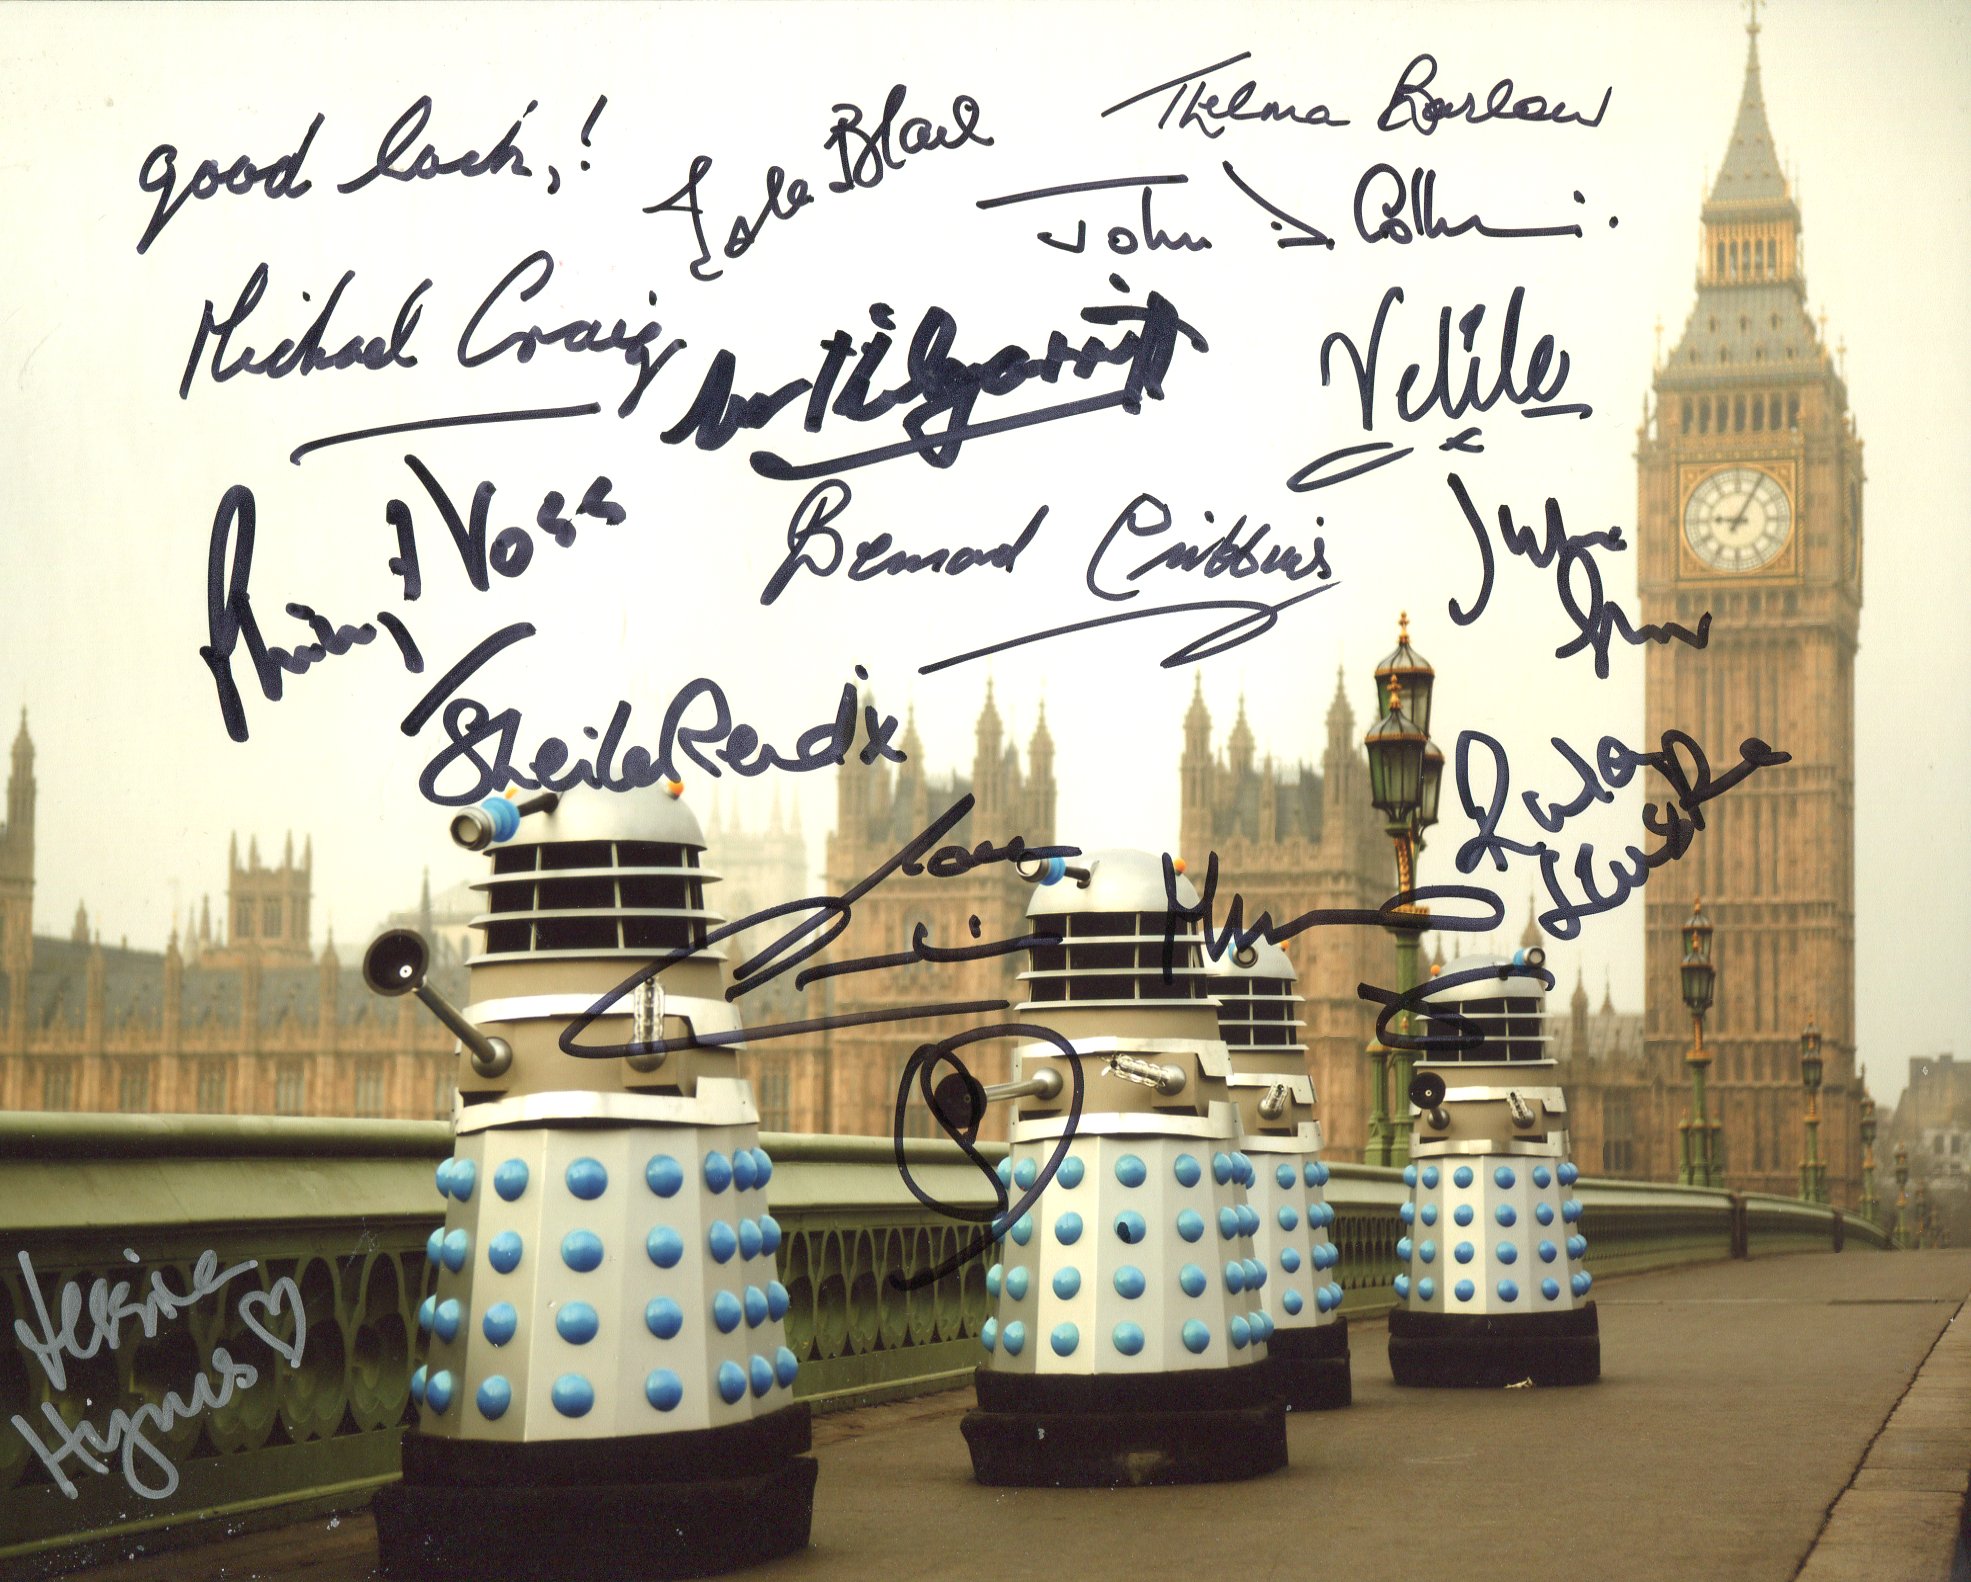 Doctor Who photo signed by THIRTEEN stars of the series, Michael Craig, Philip Voss, Sheila Reid,